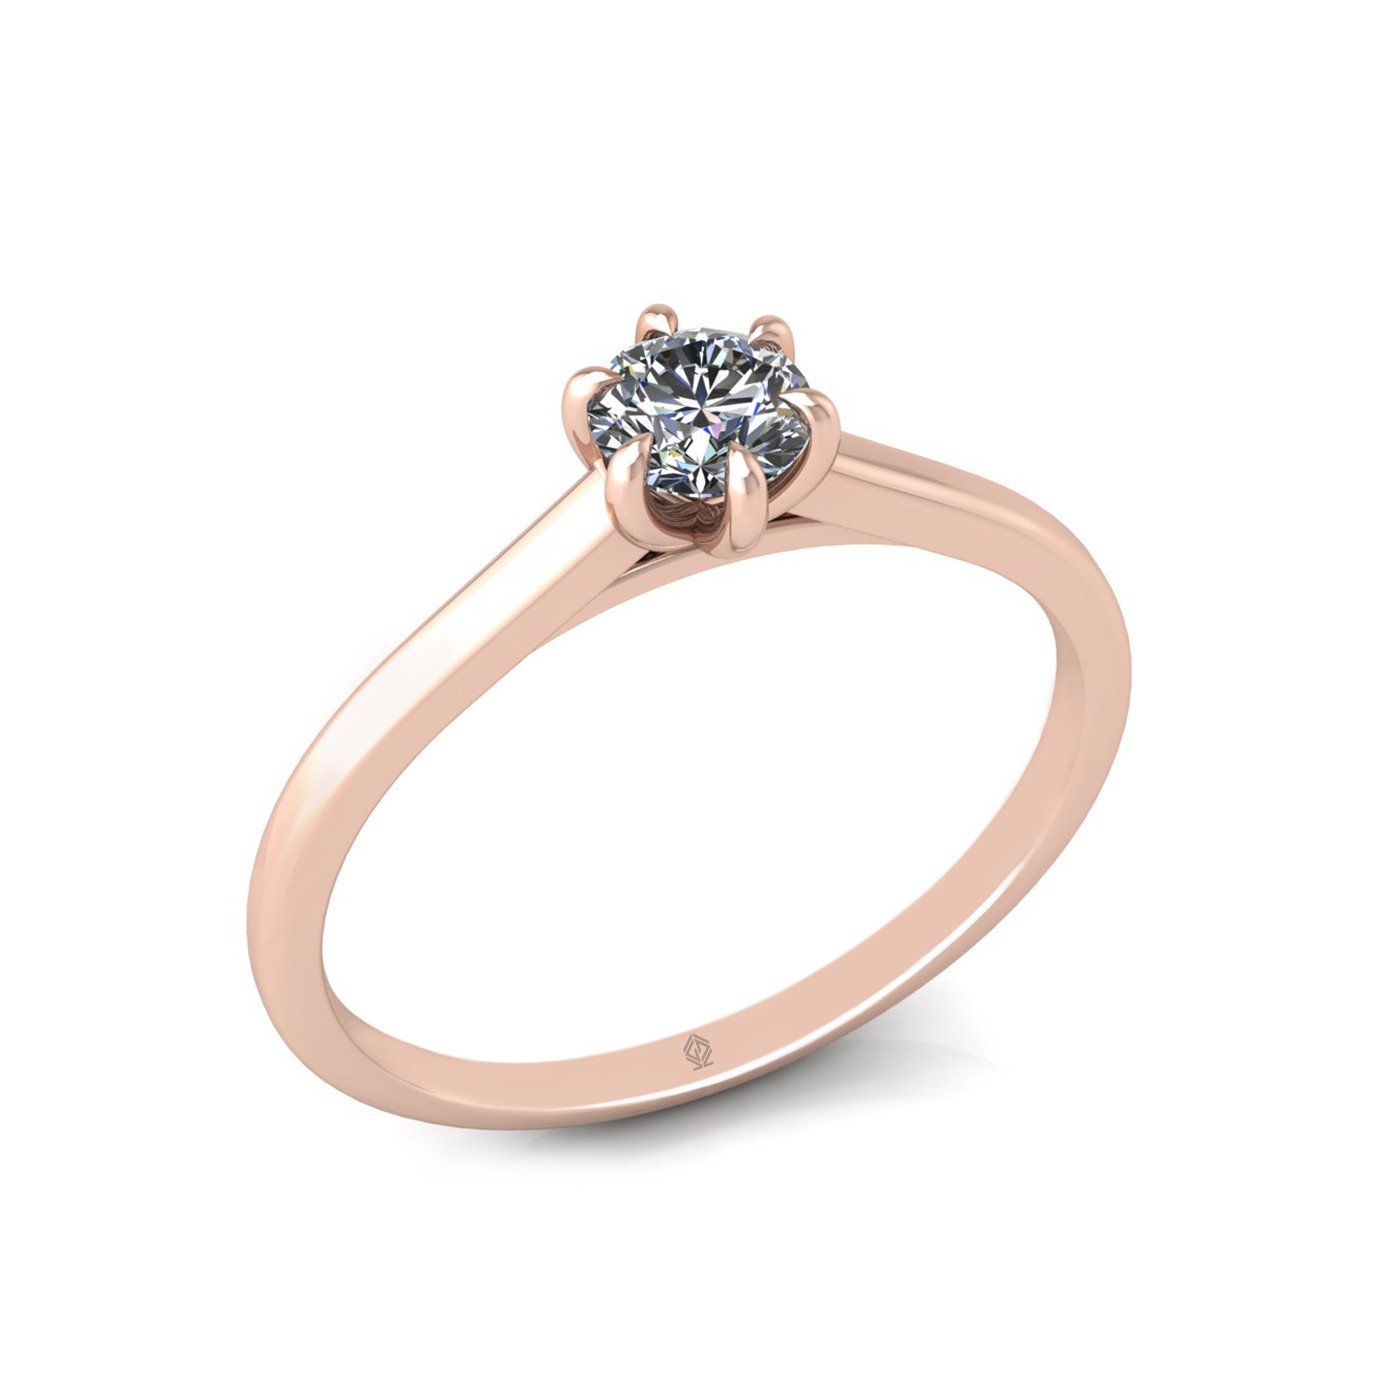 18k rose gold 0,30 ct 6 prongs solitaire round cut diamond engagement ring with whisper thin band